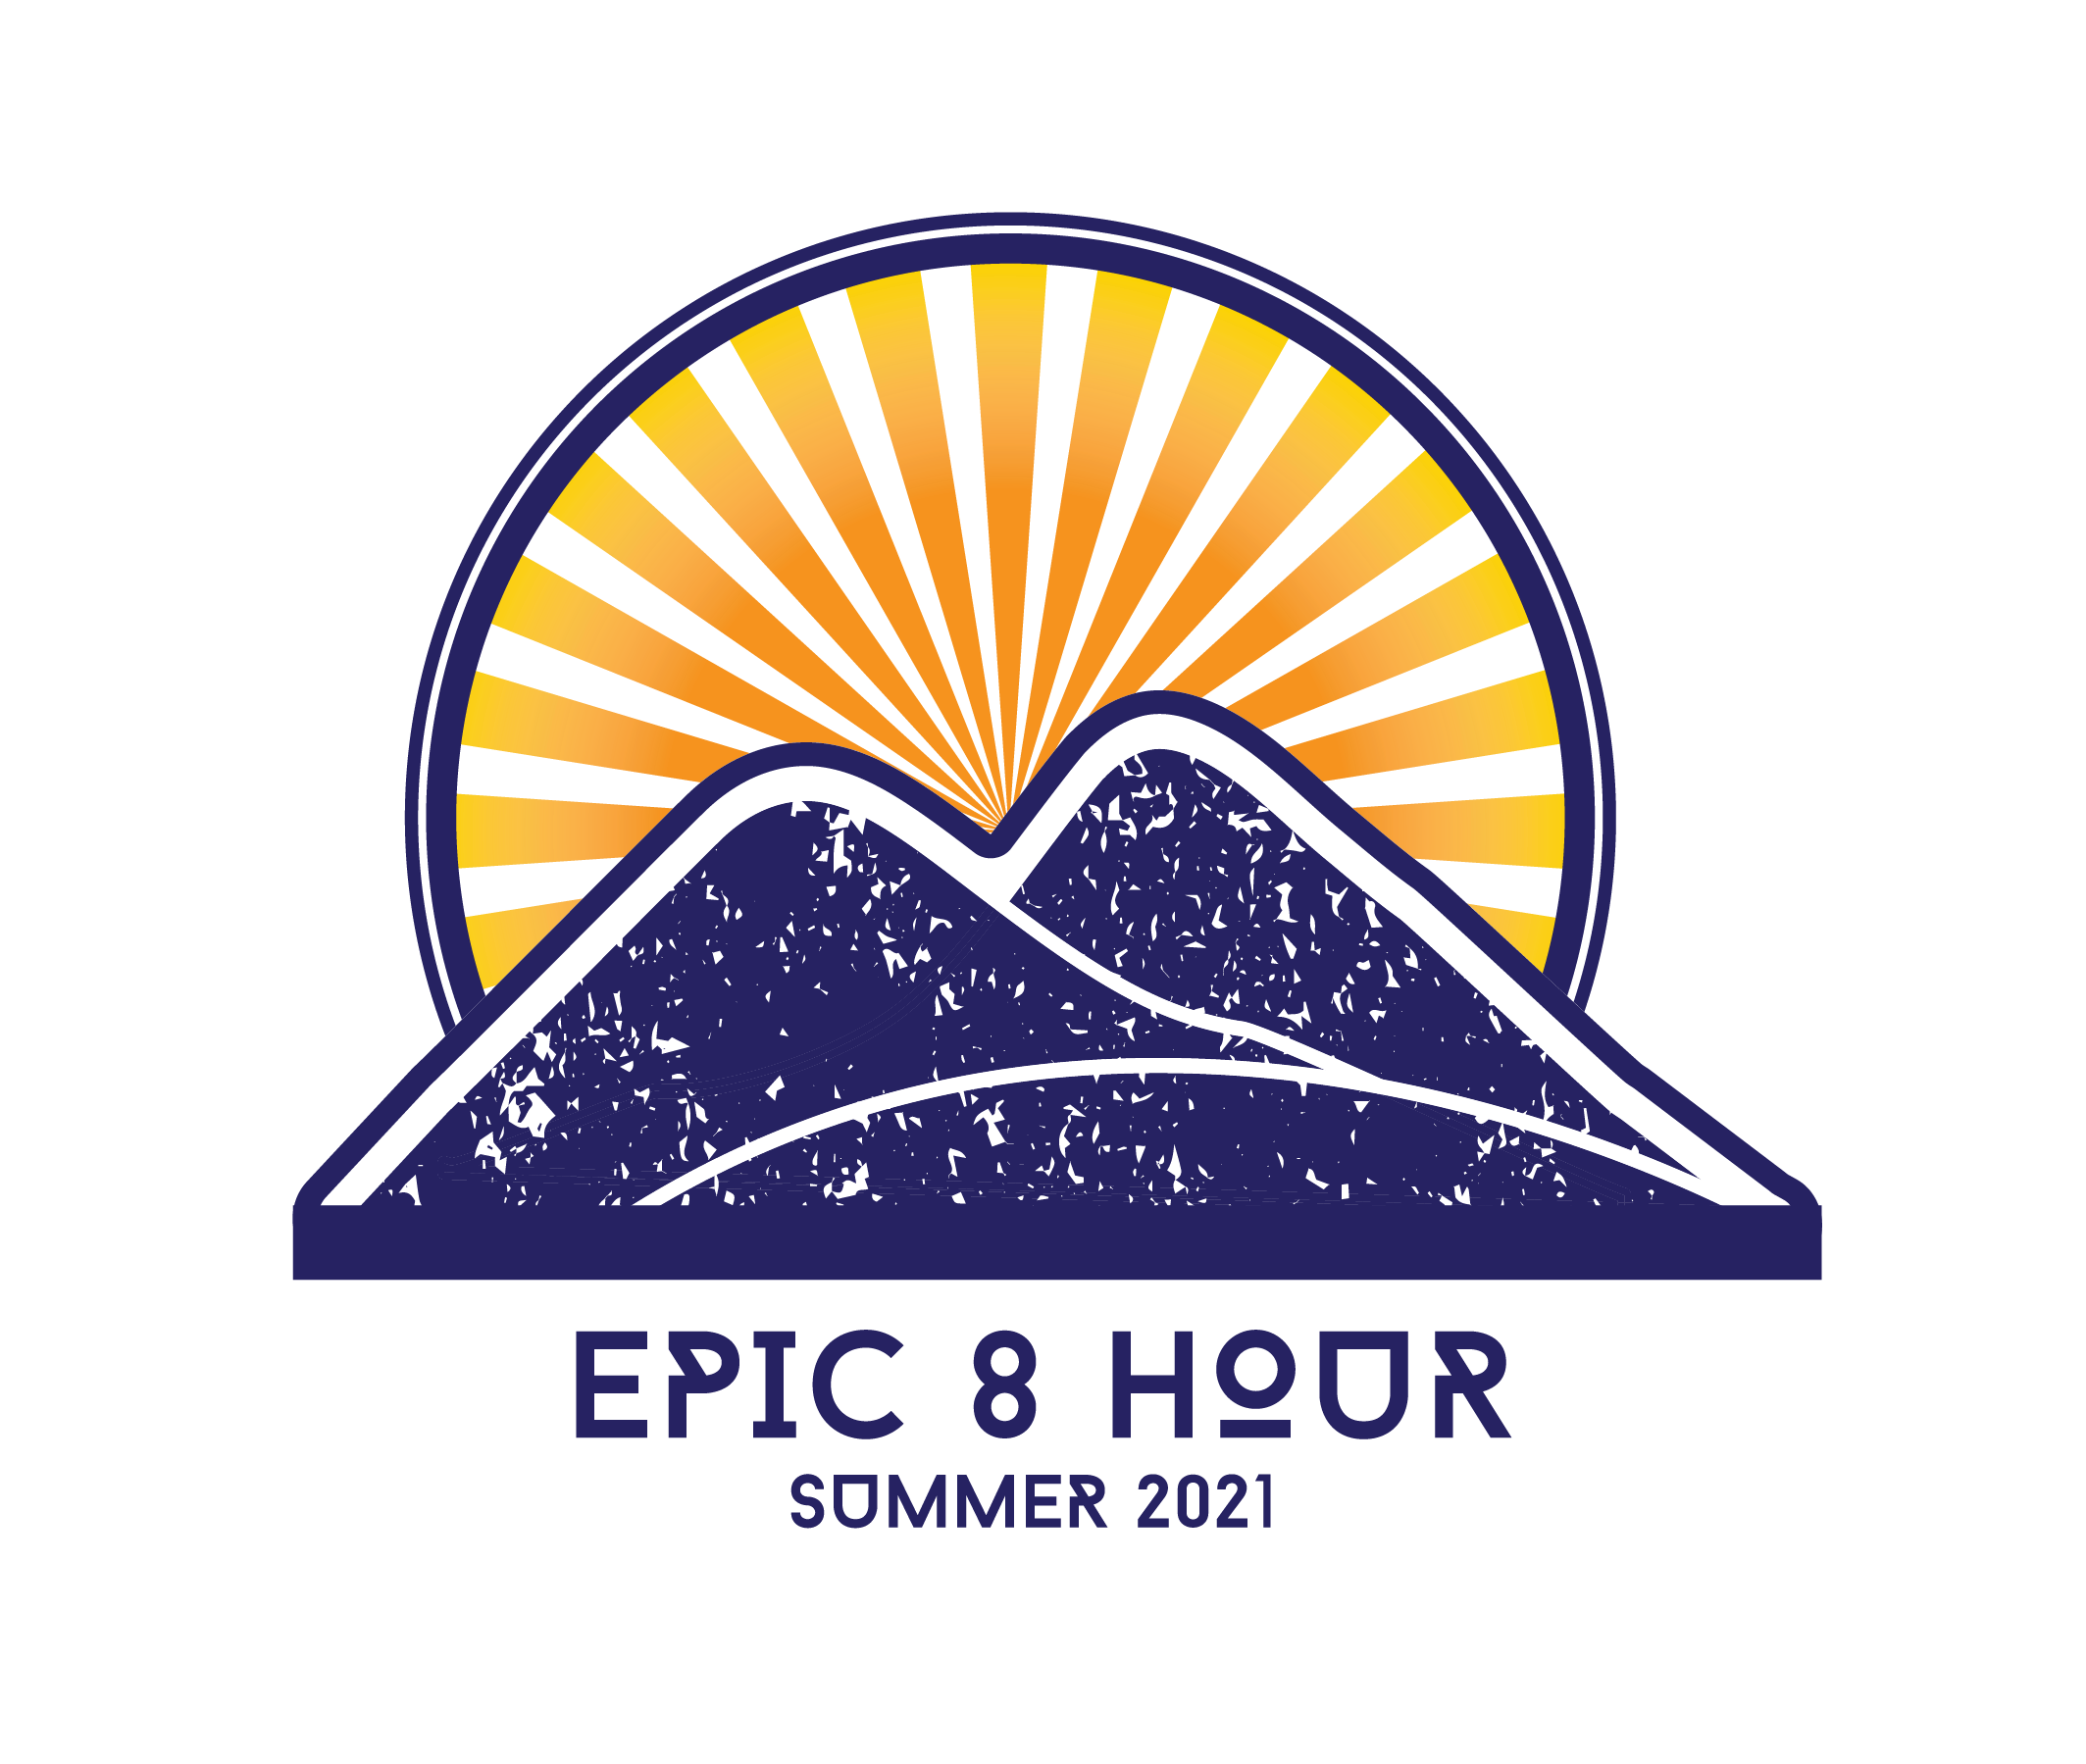 Summer Epic 8 Hour 2021